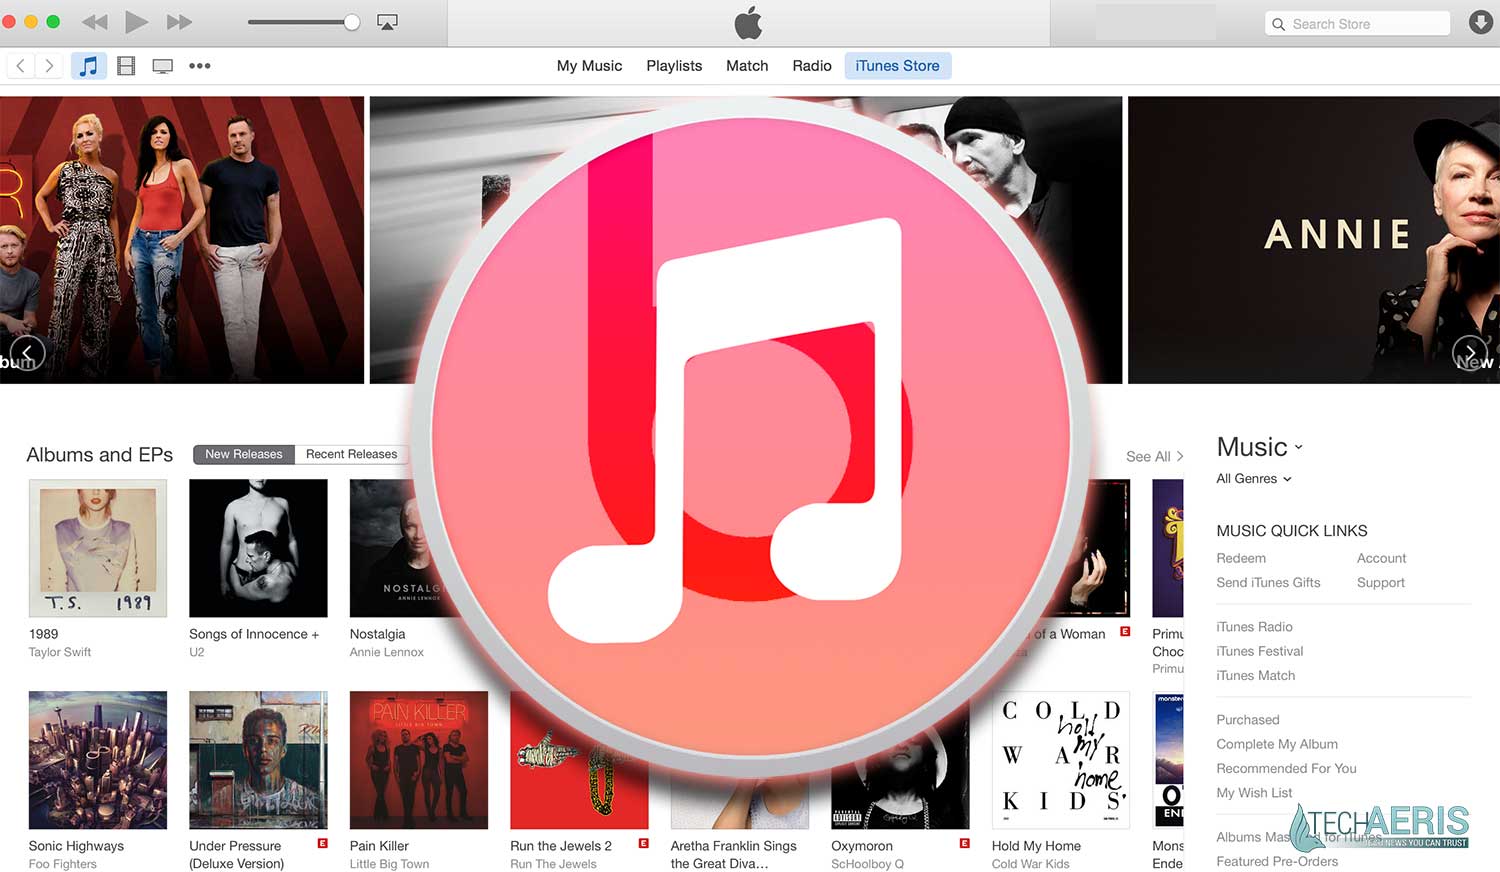 Apple-Merges-Beats-With-iTunes